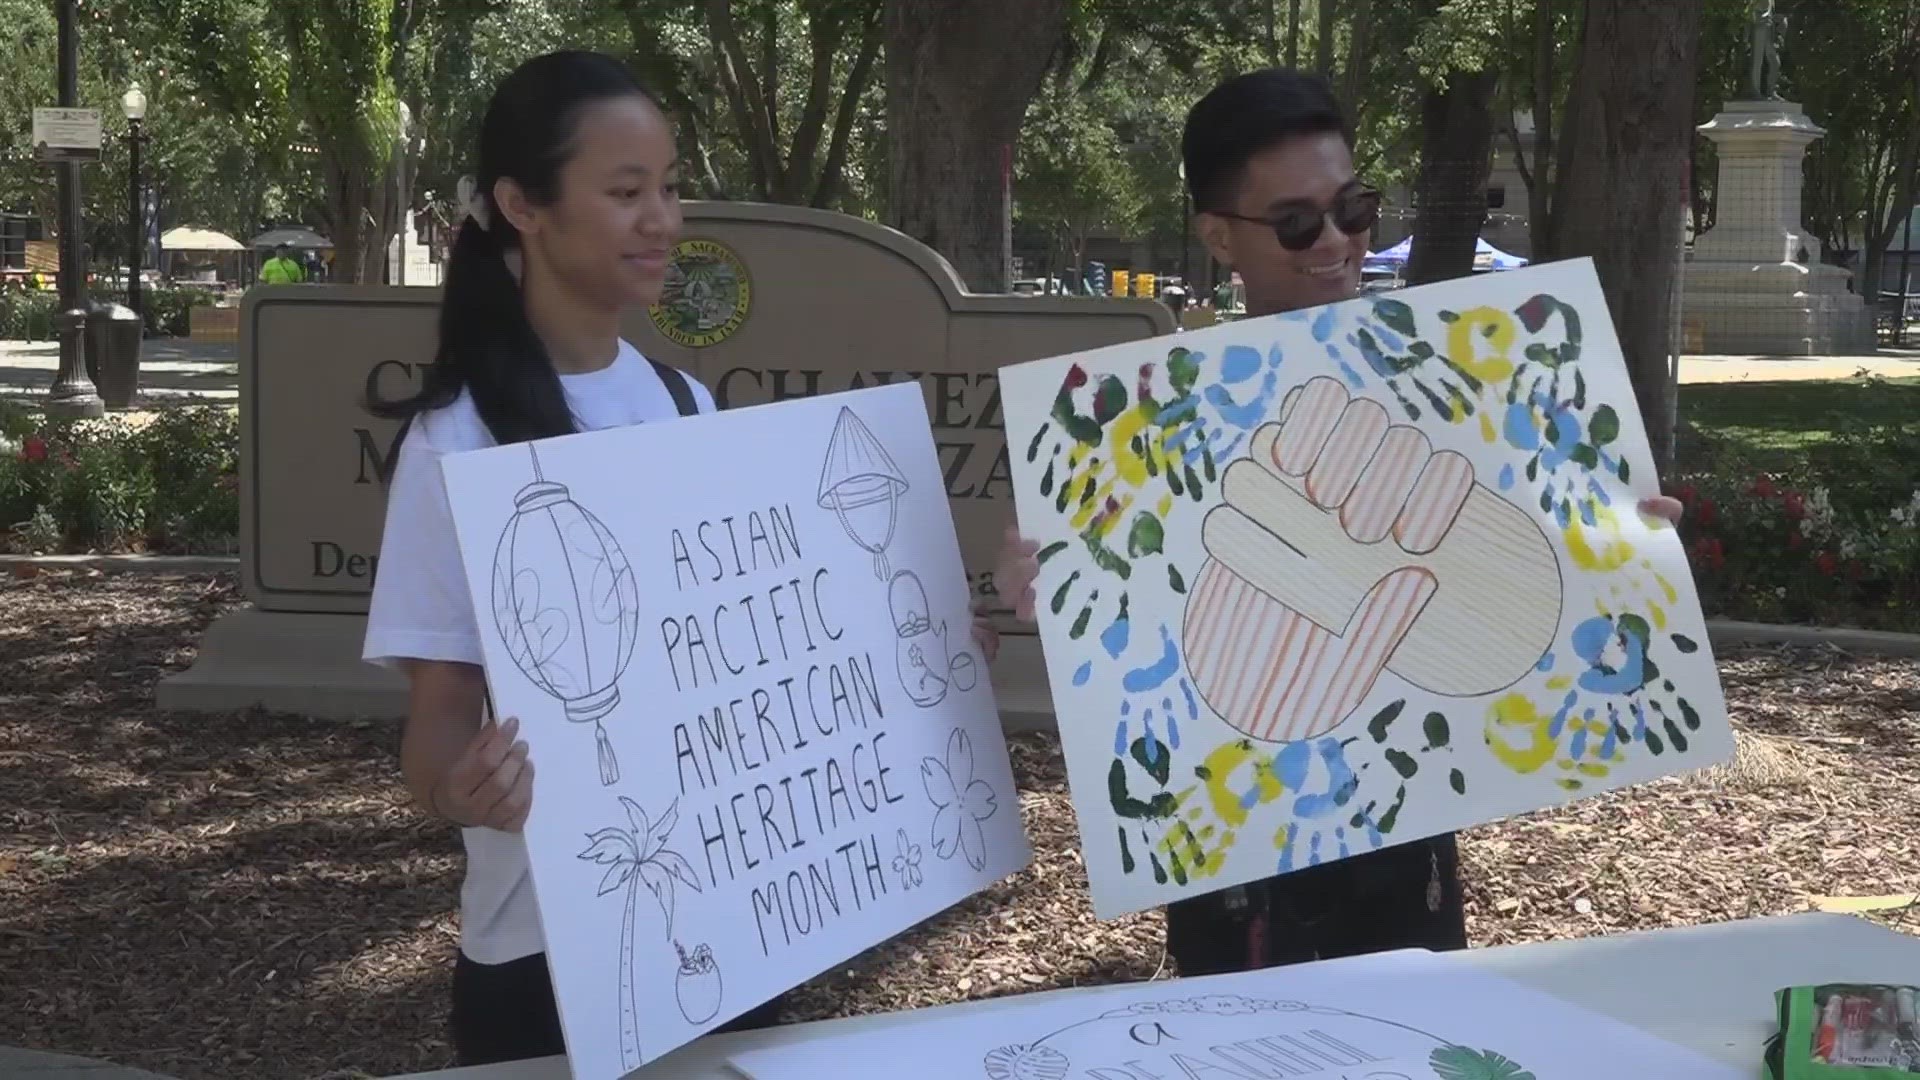 For Asian American and Pacific Islander Heritage month, one group got together and created a photo booth meant to education.